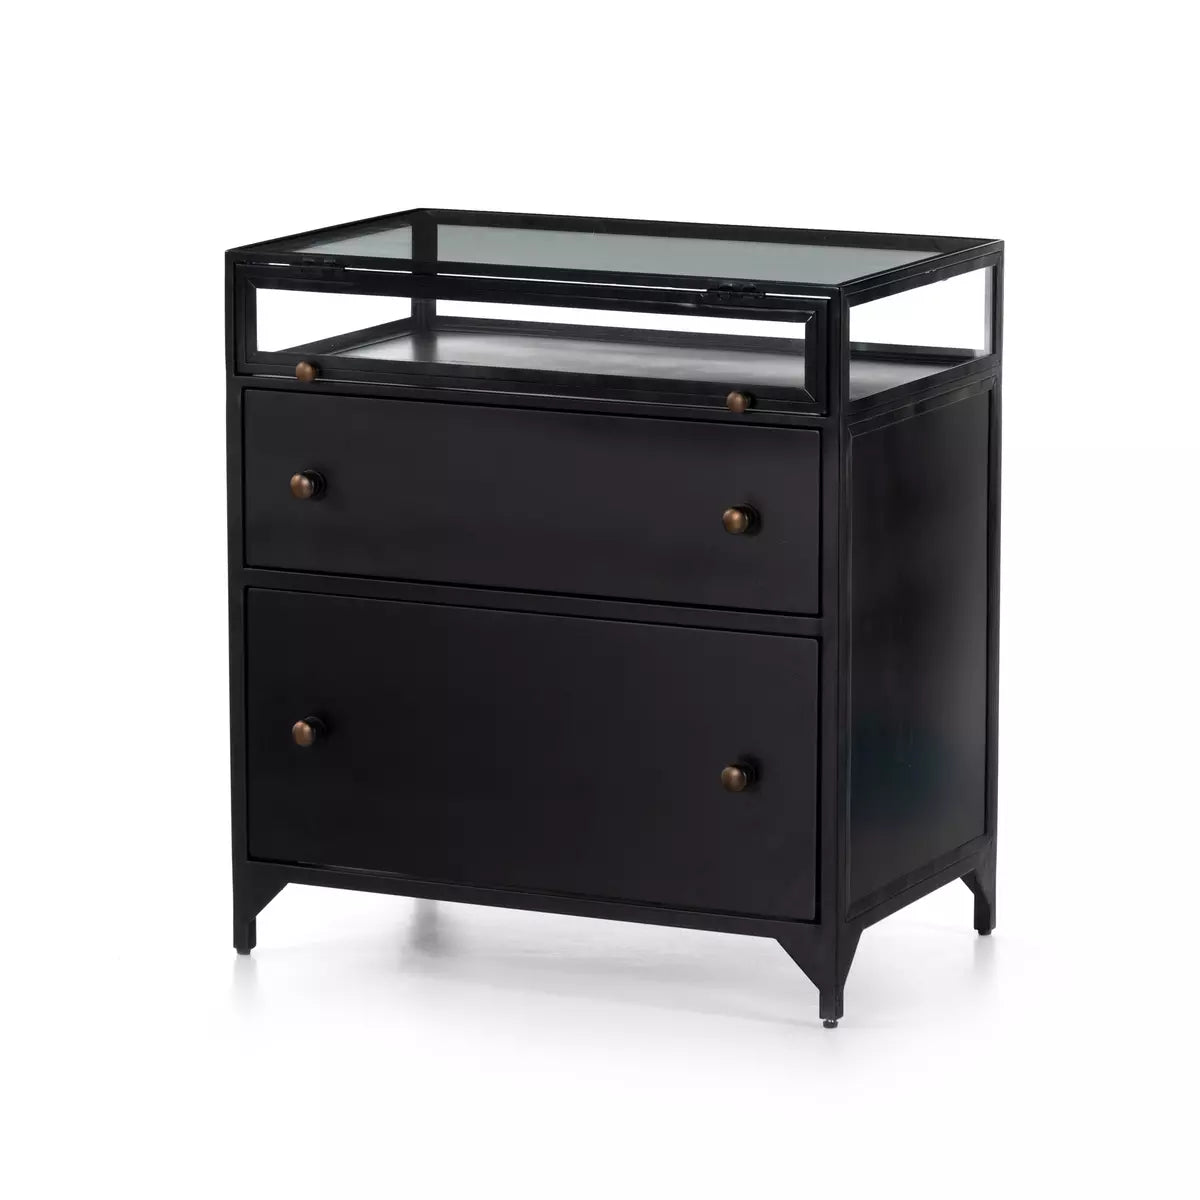 NIGHTSTAND WITH DISPLAY